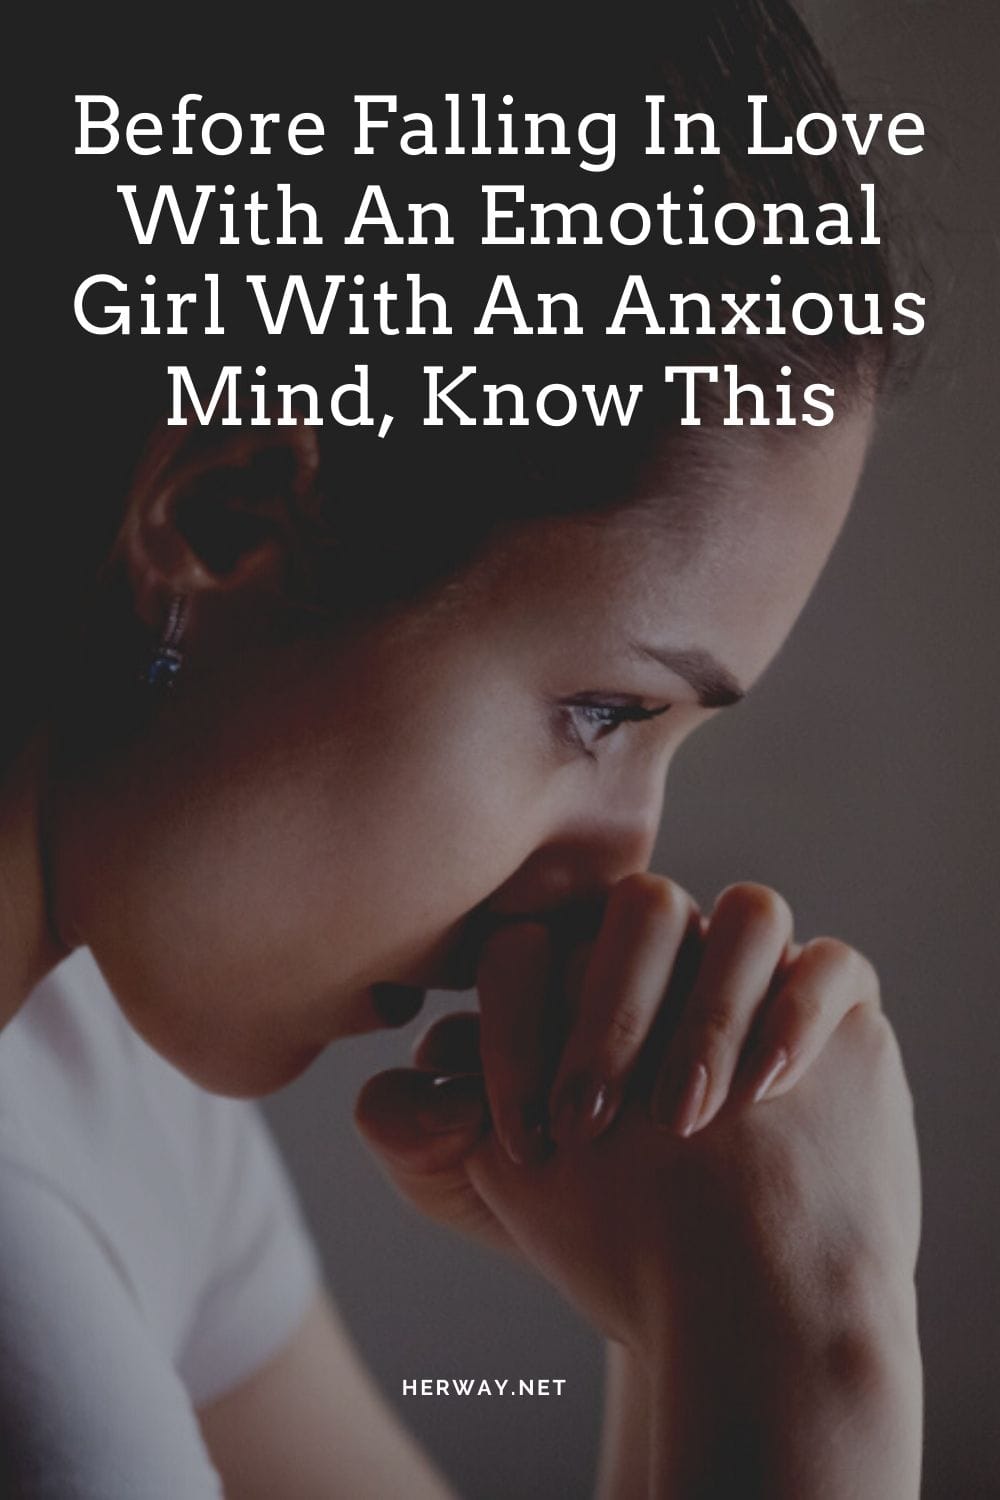 Before Falling In Love With An Emotional Girl With An Anxious Mind, Know This